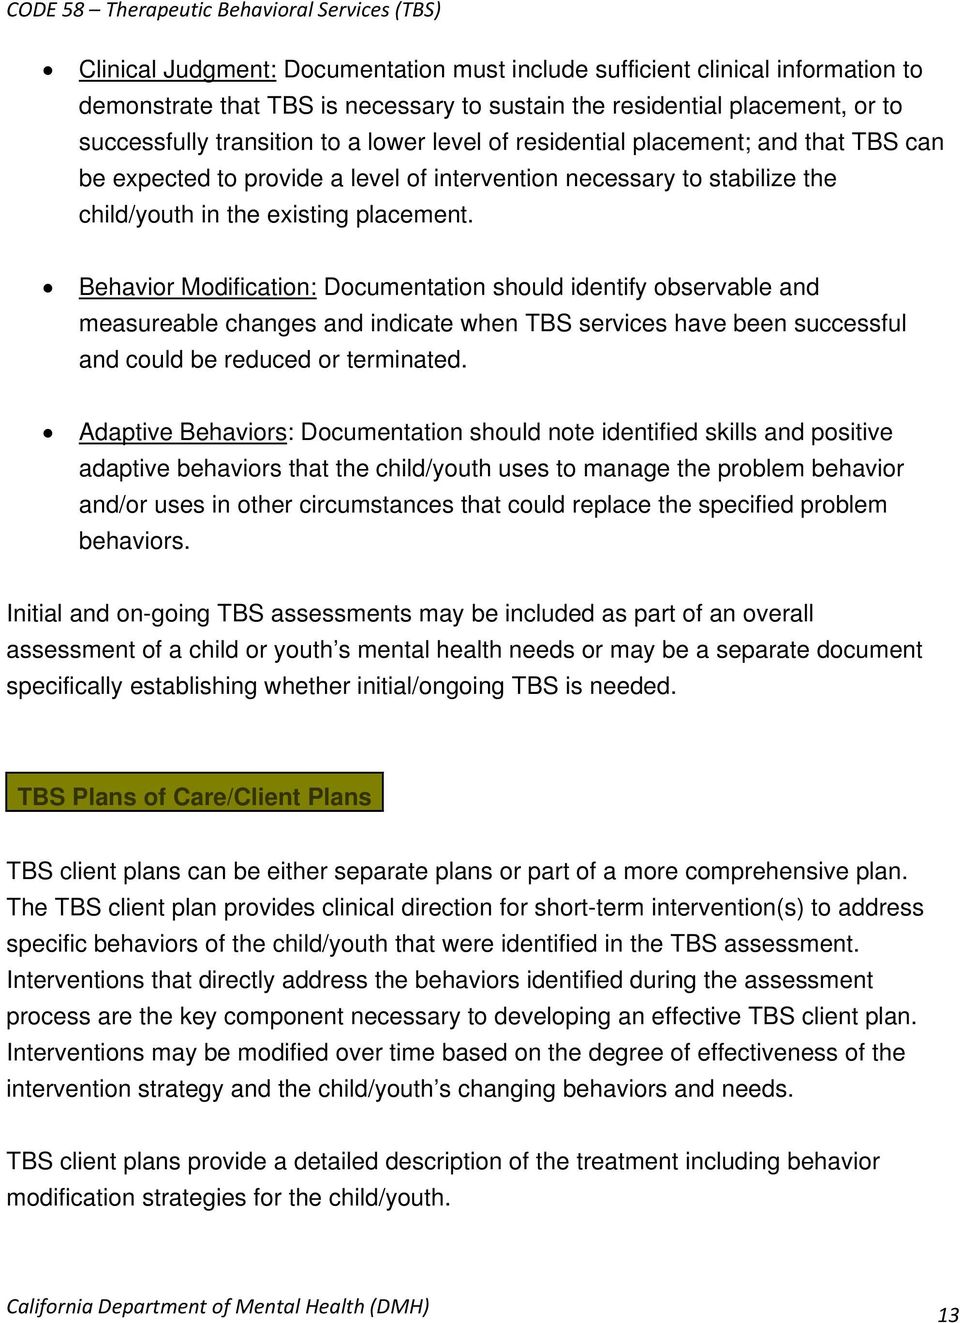 Behavior Modification: Documentation should identify observable and measureable changes and indicate when TBS services have been successful and could be reduced or terminated.